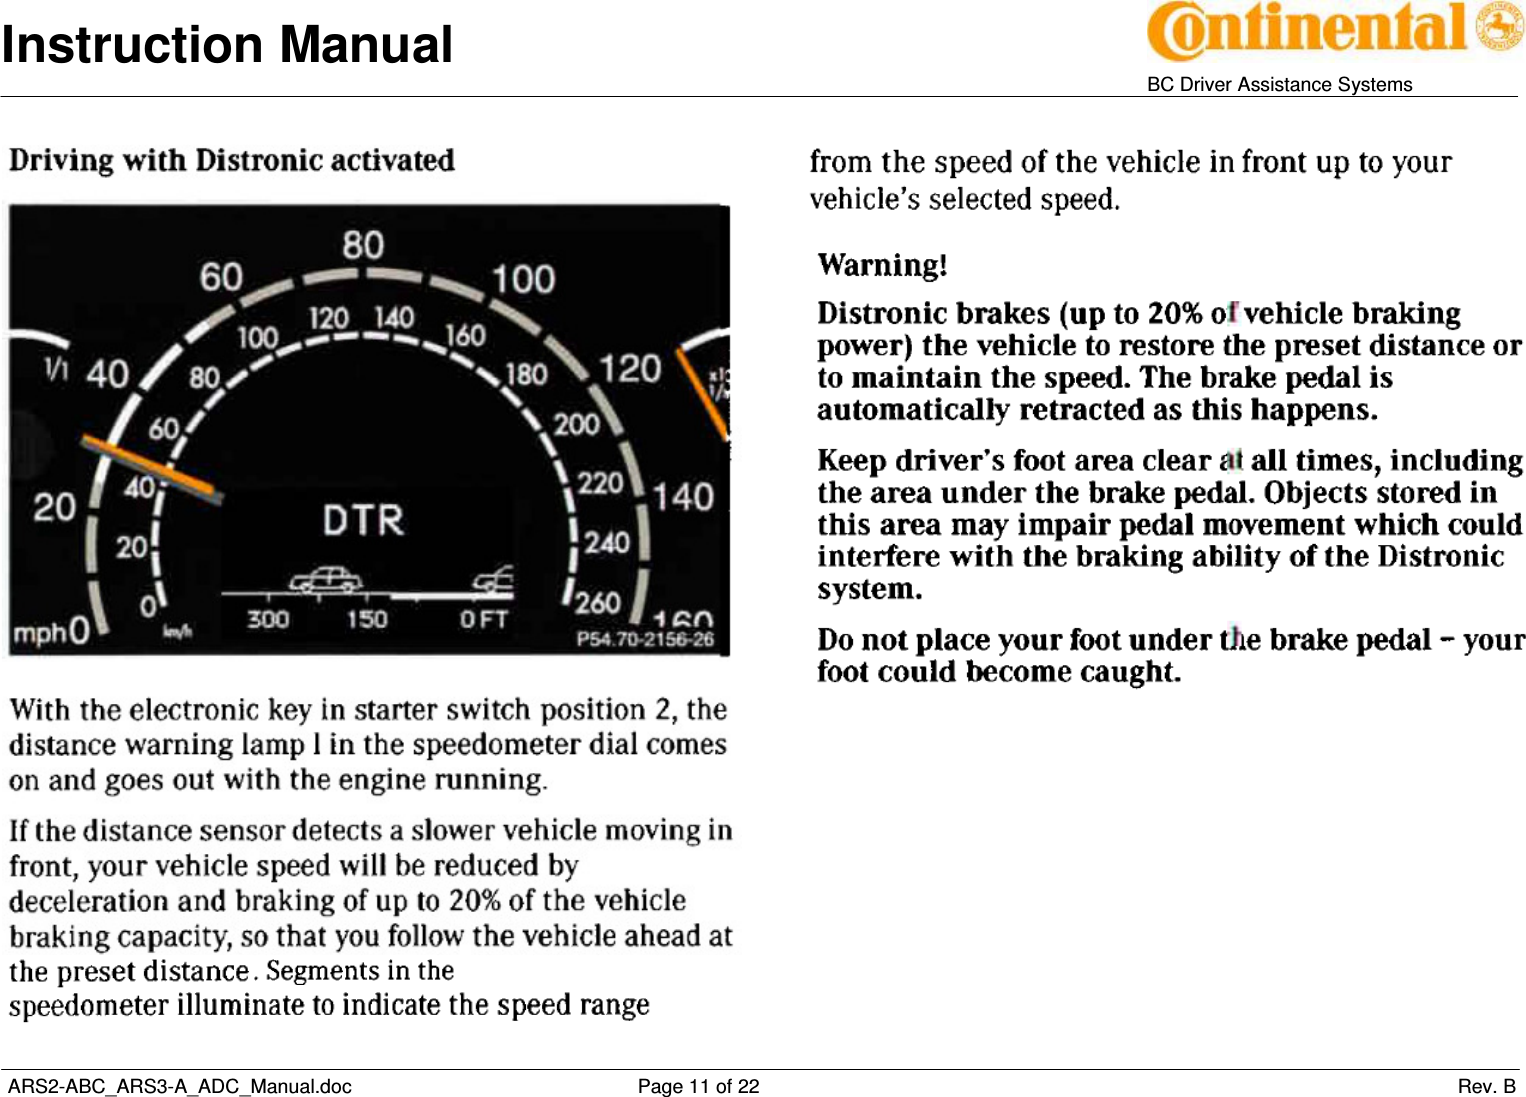 Instruction Manual   BC Driver Assistance Systems  ARS2-ABC_ARS3-A_ADC_Manual.doc     Page 11 of 22                 Rev. B       